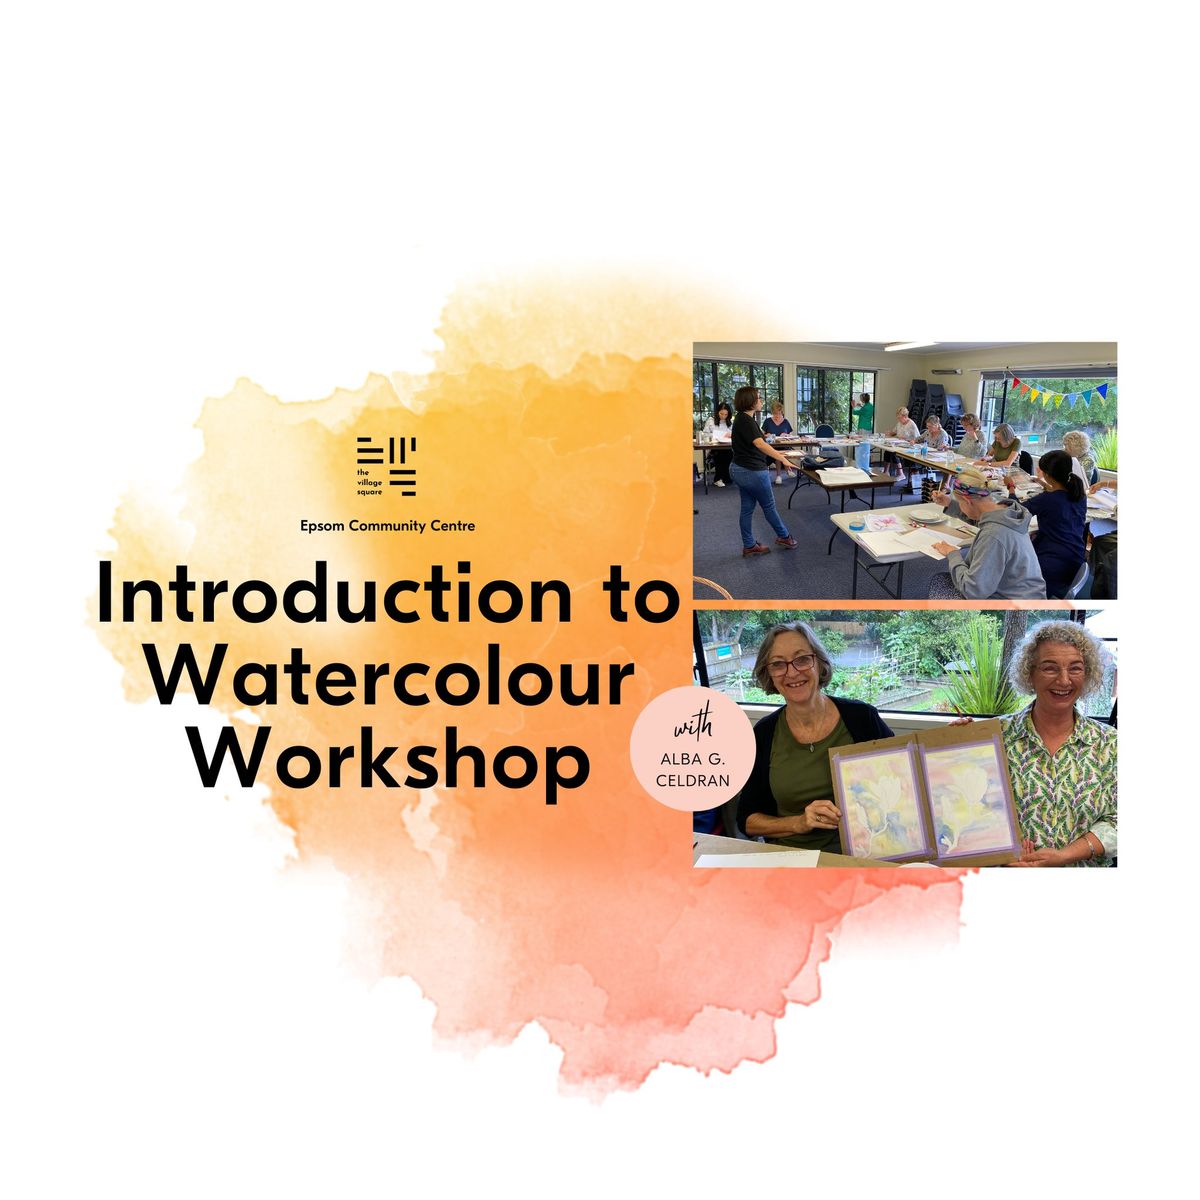 Introduction to Watercolour Workshop with Alba G Celdran